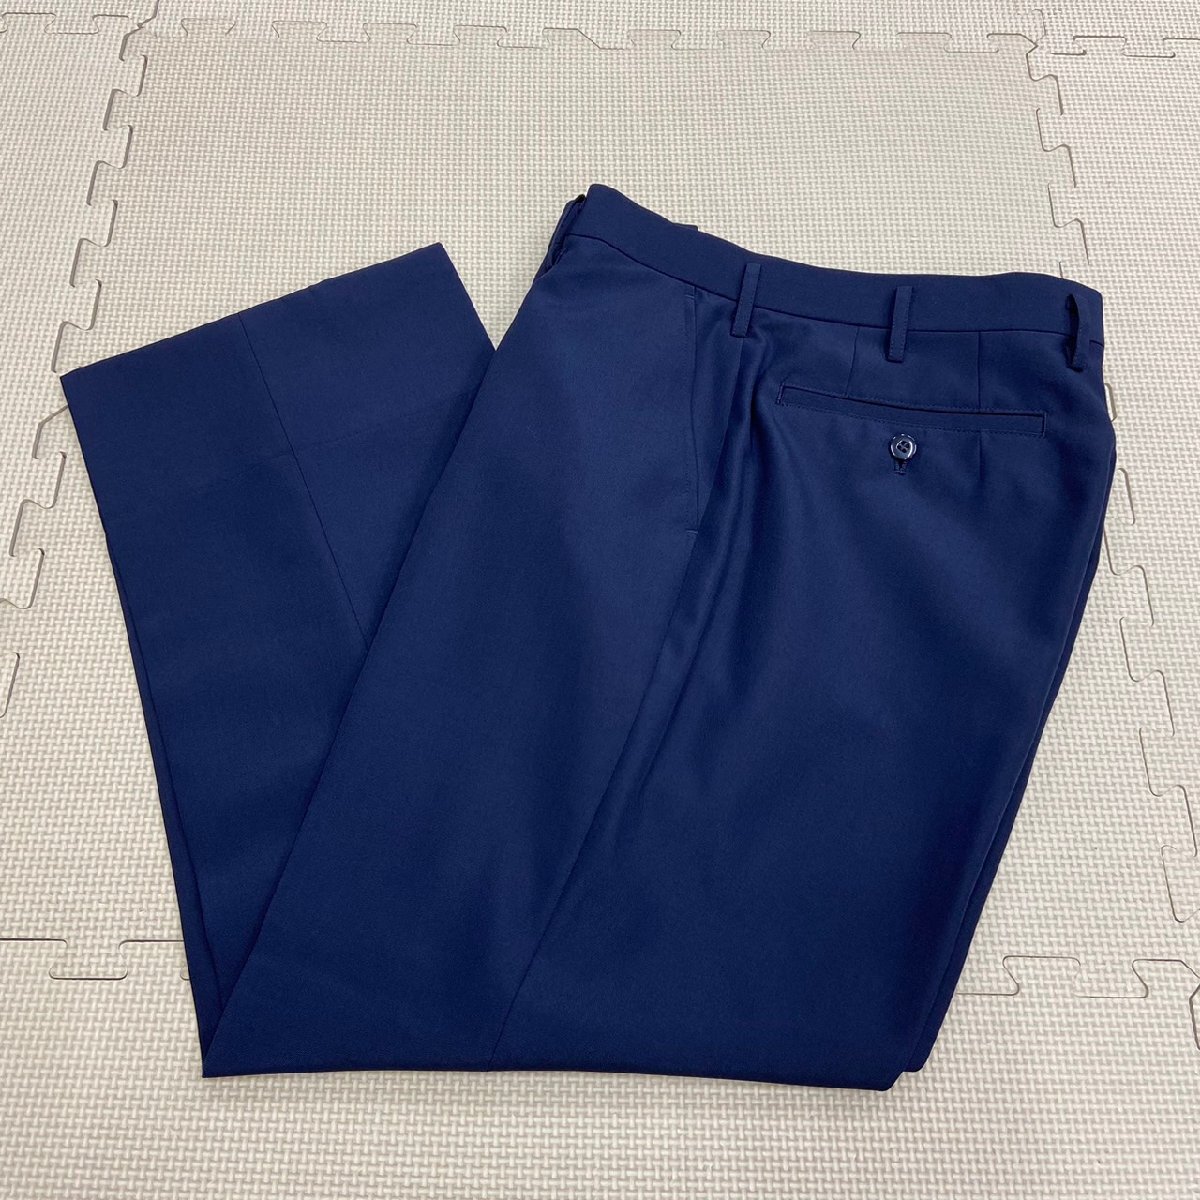 Y636/T1084 ( used ) Tochigi prefecture . north junior high school man . uniform 1 point / designation goods / summer trousers,W76, total length approximately 89, length of the legs approximately 64, navy blue, beautiful goods /GREEN MATE/ short period put on supplies 